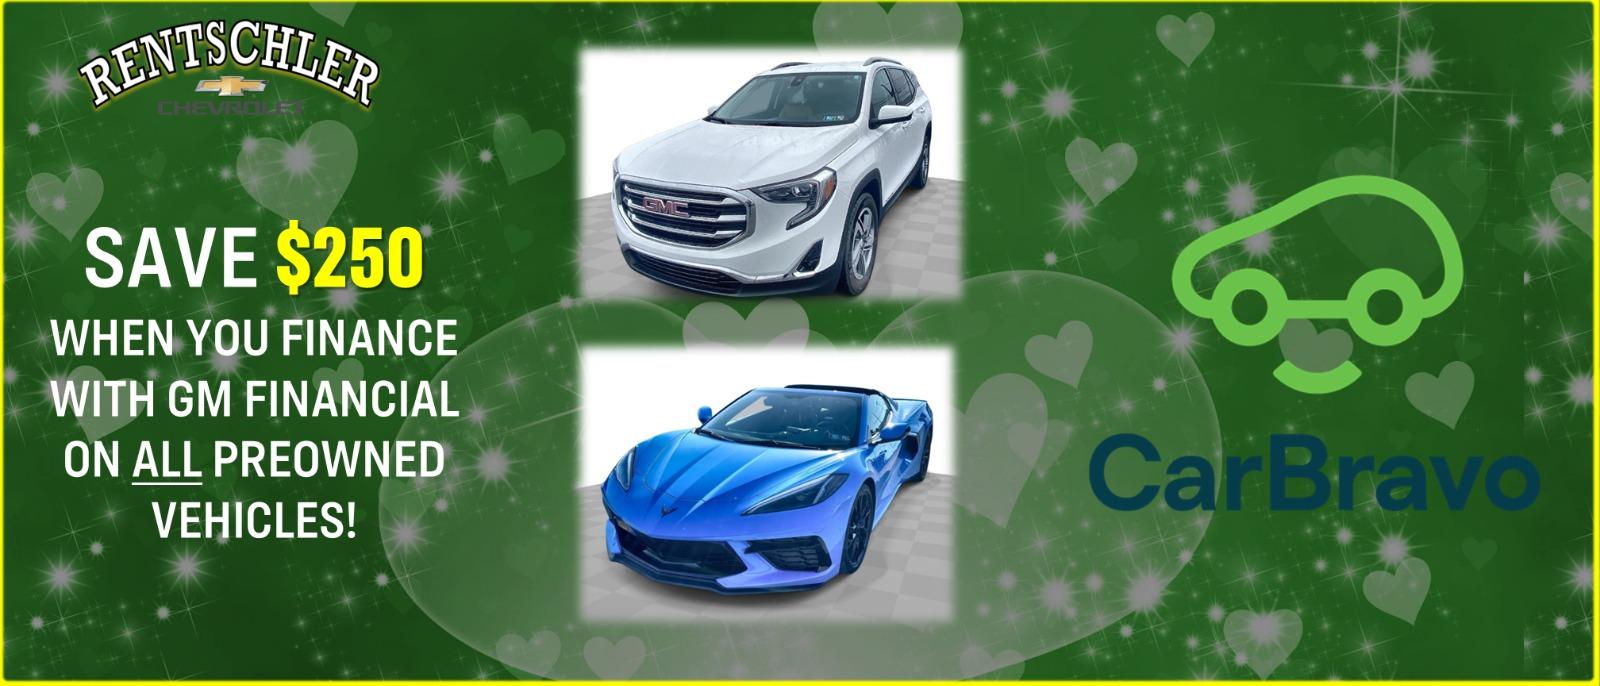 Certified Preowned Vehicles